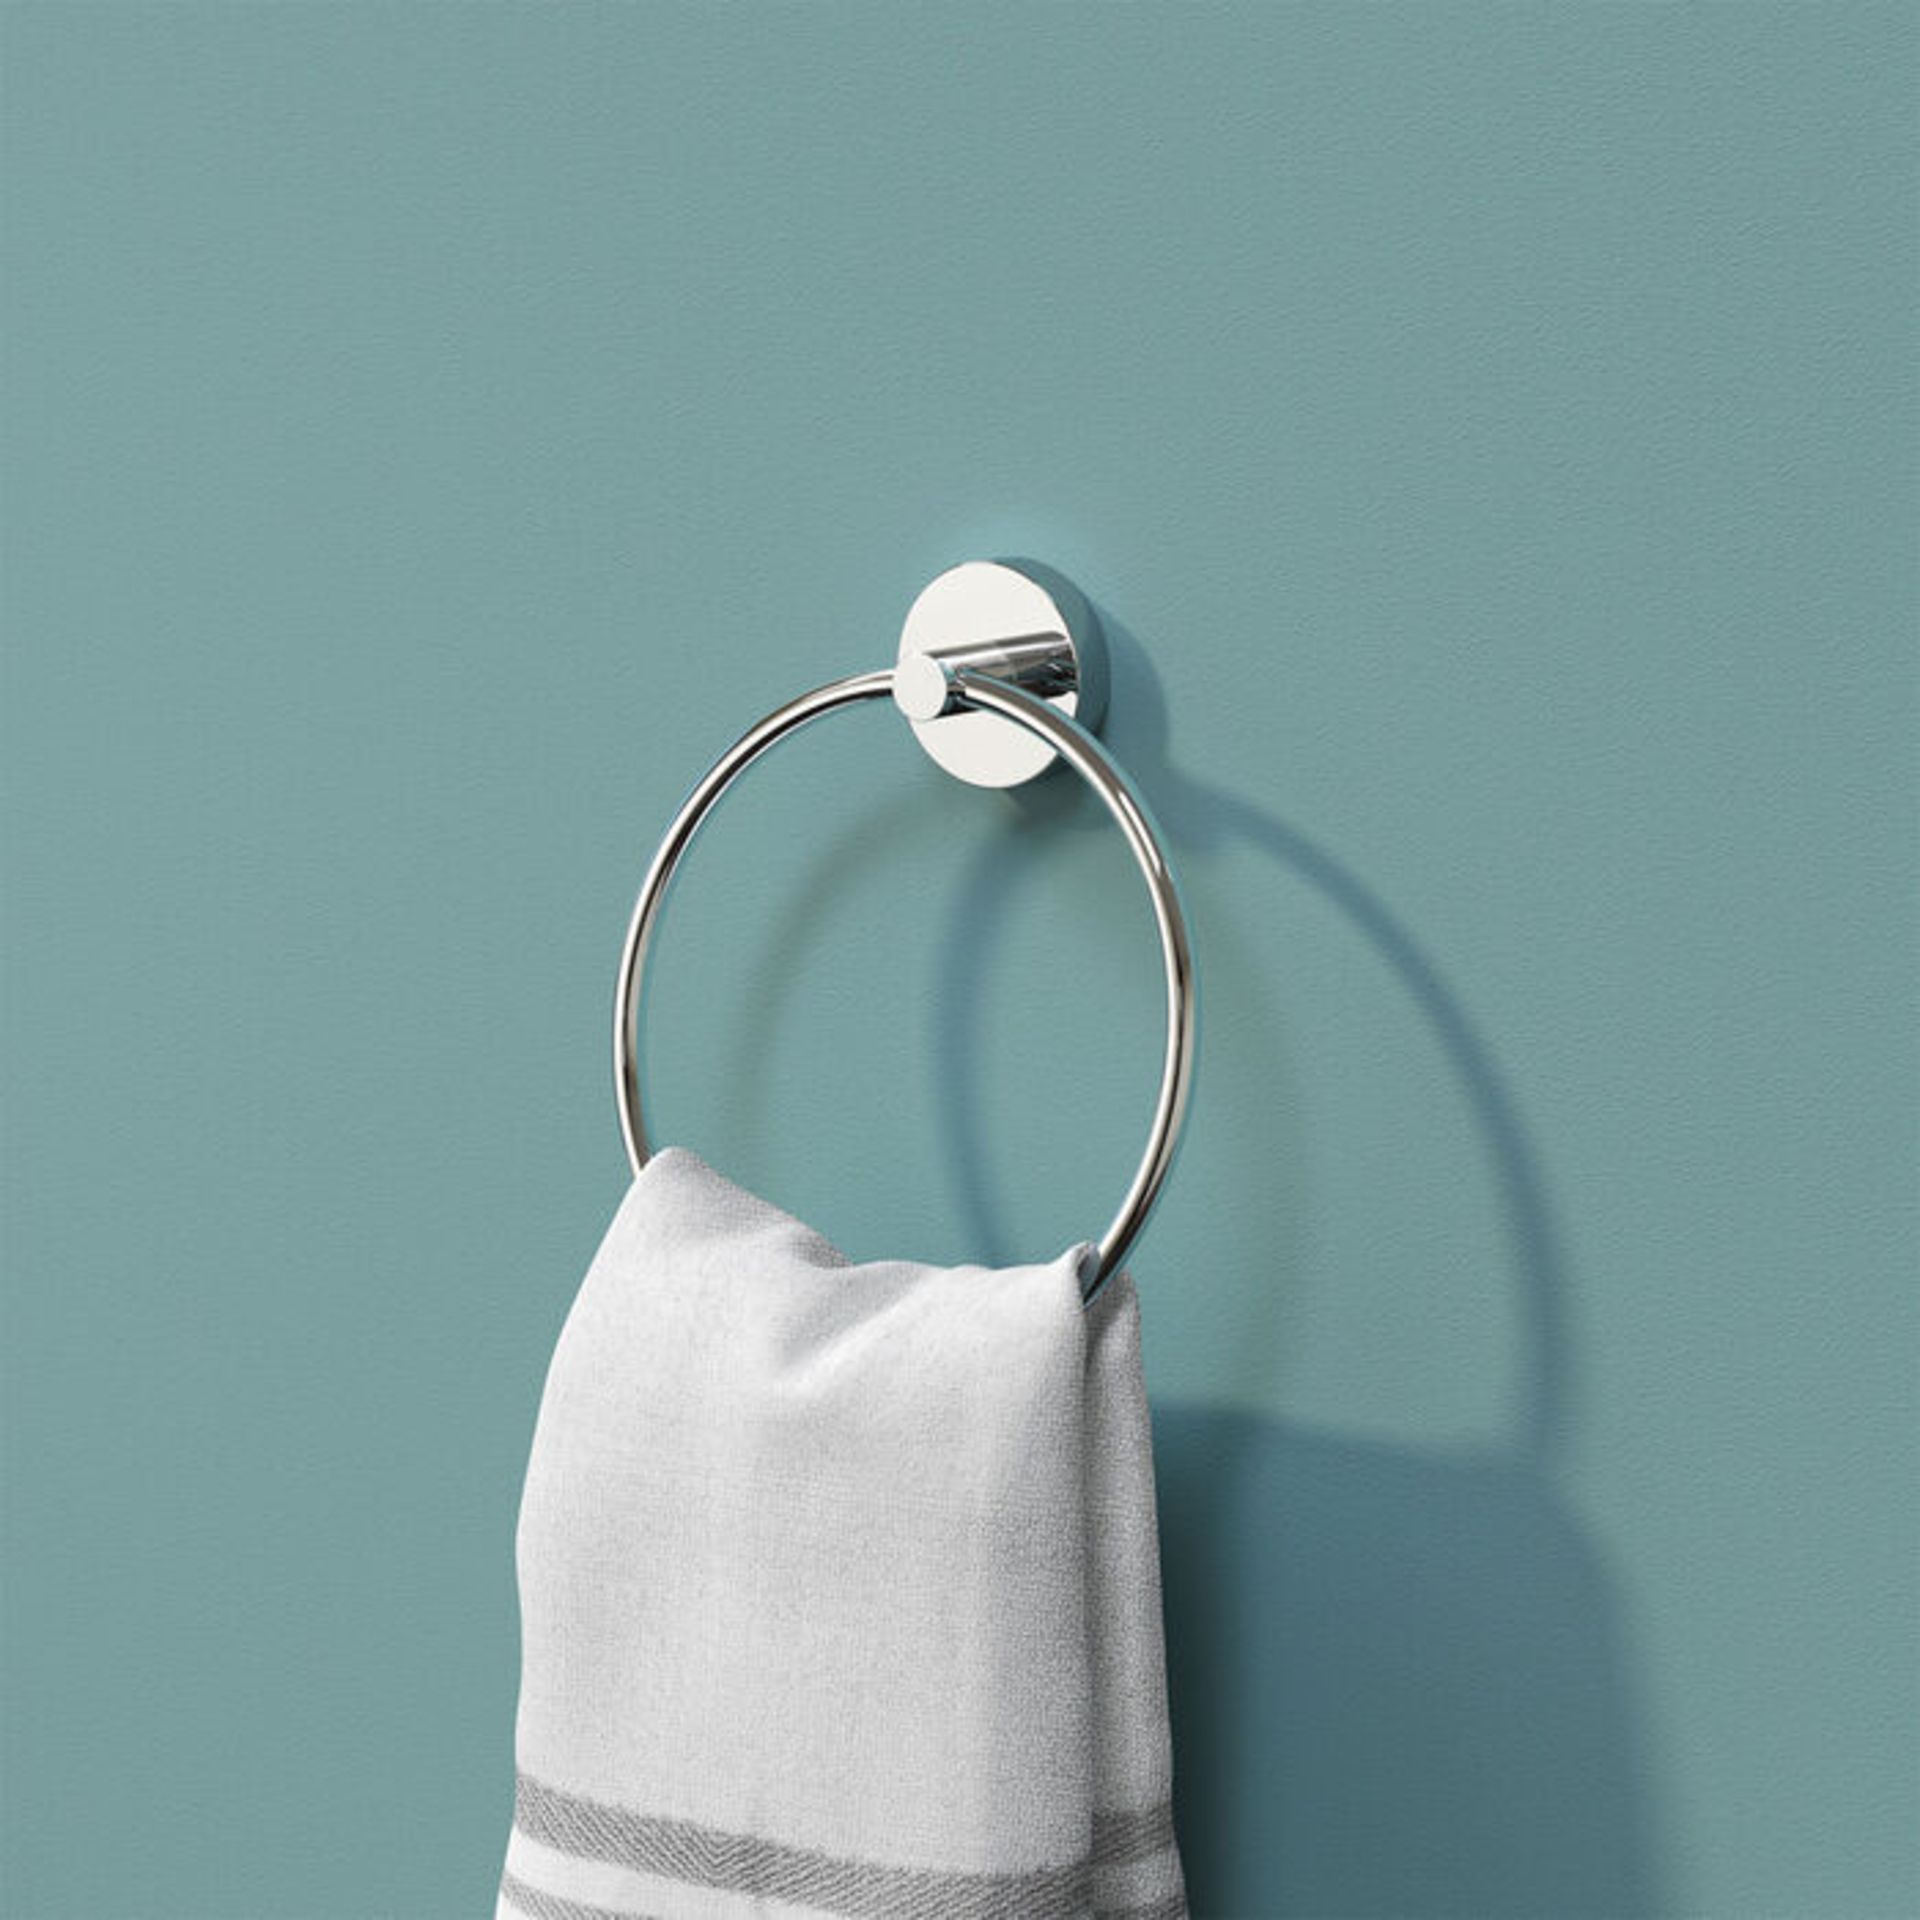 (YU1015) Finsbury Towel Ring. Simple yet stylish Completes your bathroom with a little extra ... - Image 3 of 3